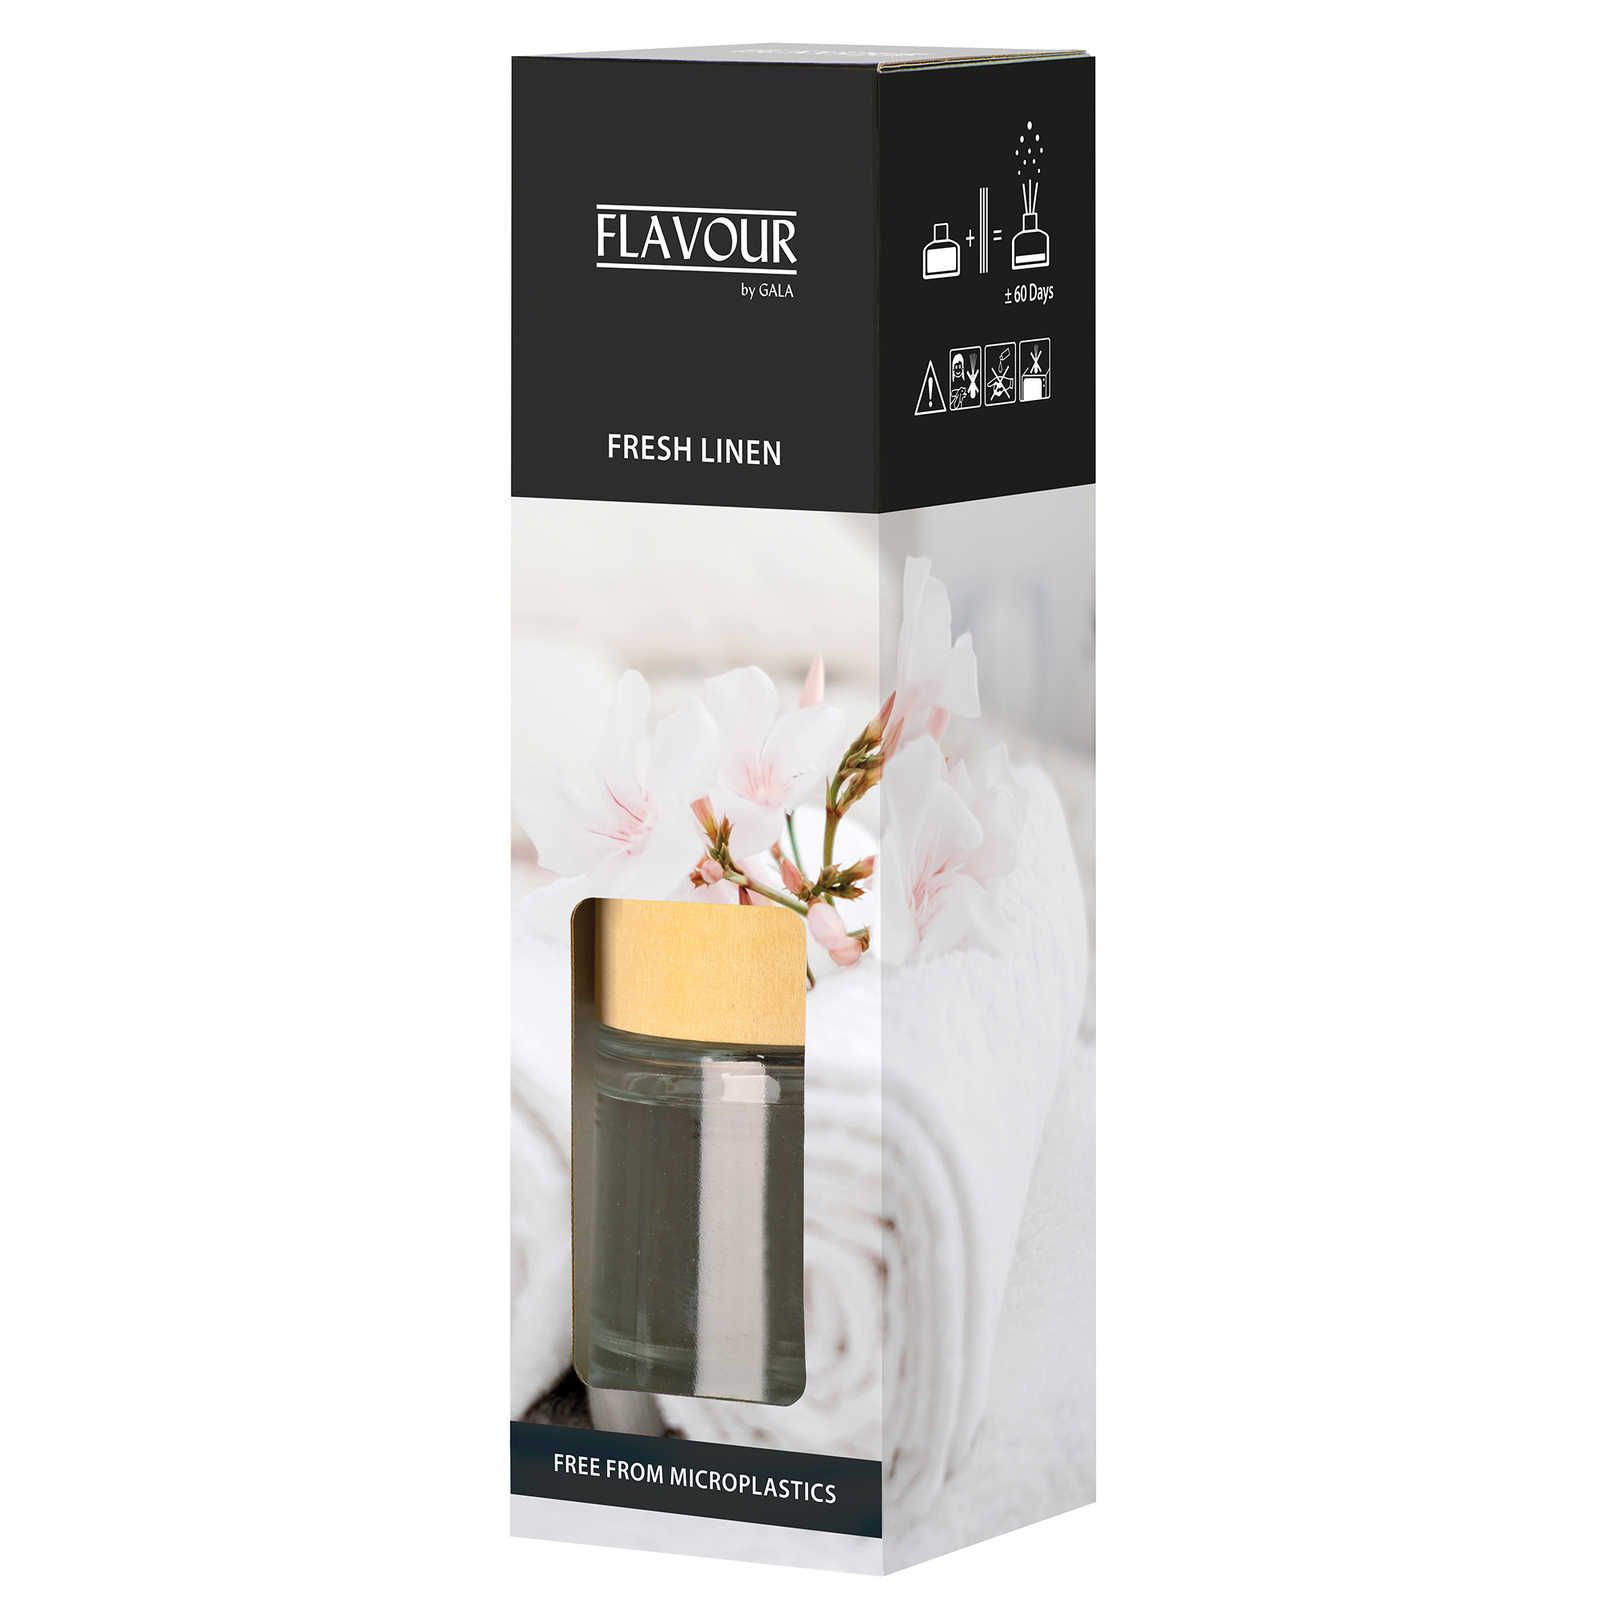         Fresh Linen Scent Sticks with pleasant scent of freshly washed laundry - 100ml
    